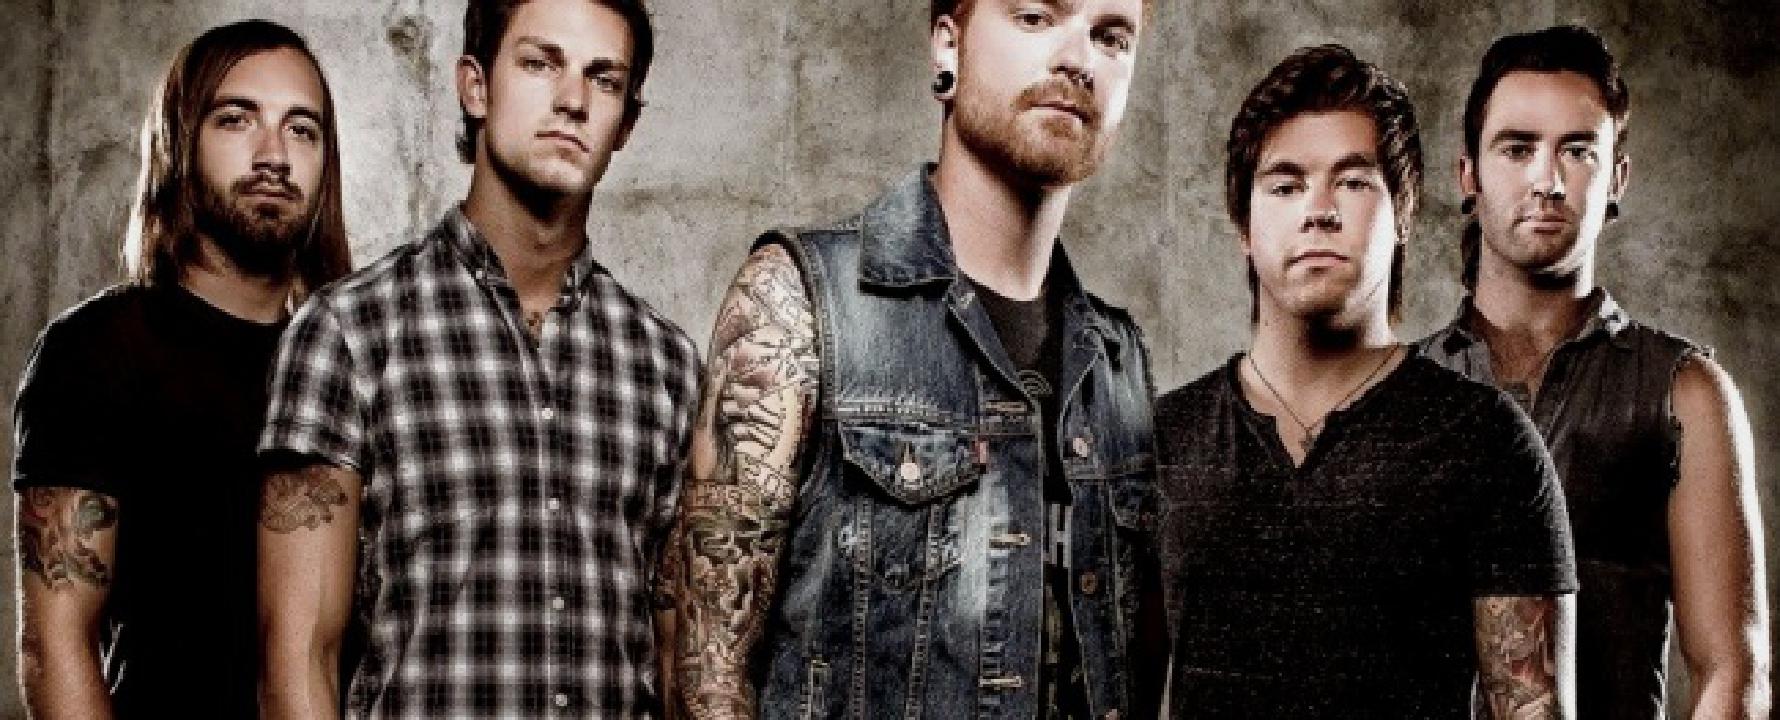 Promotional photograph of Memphis May Fire.